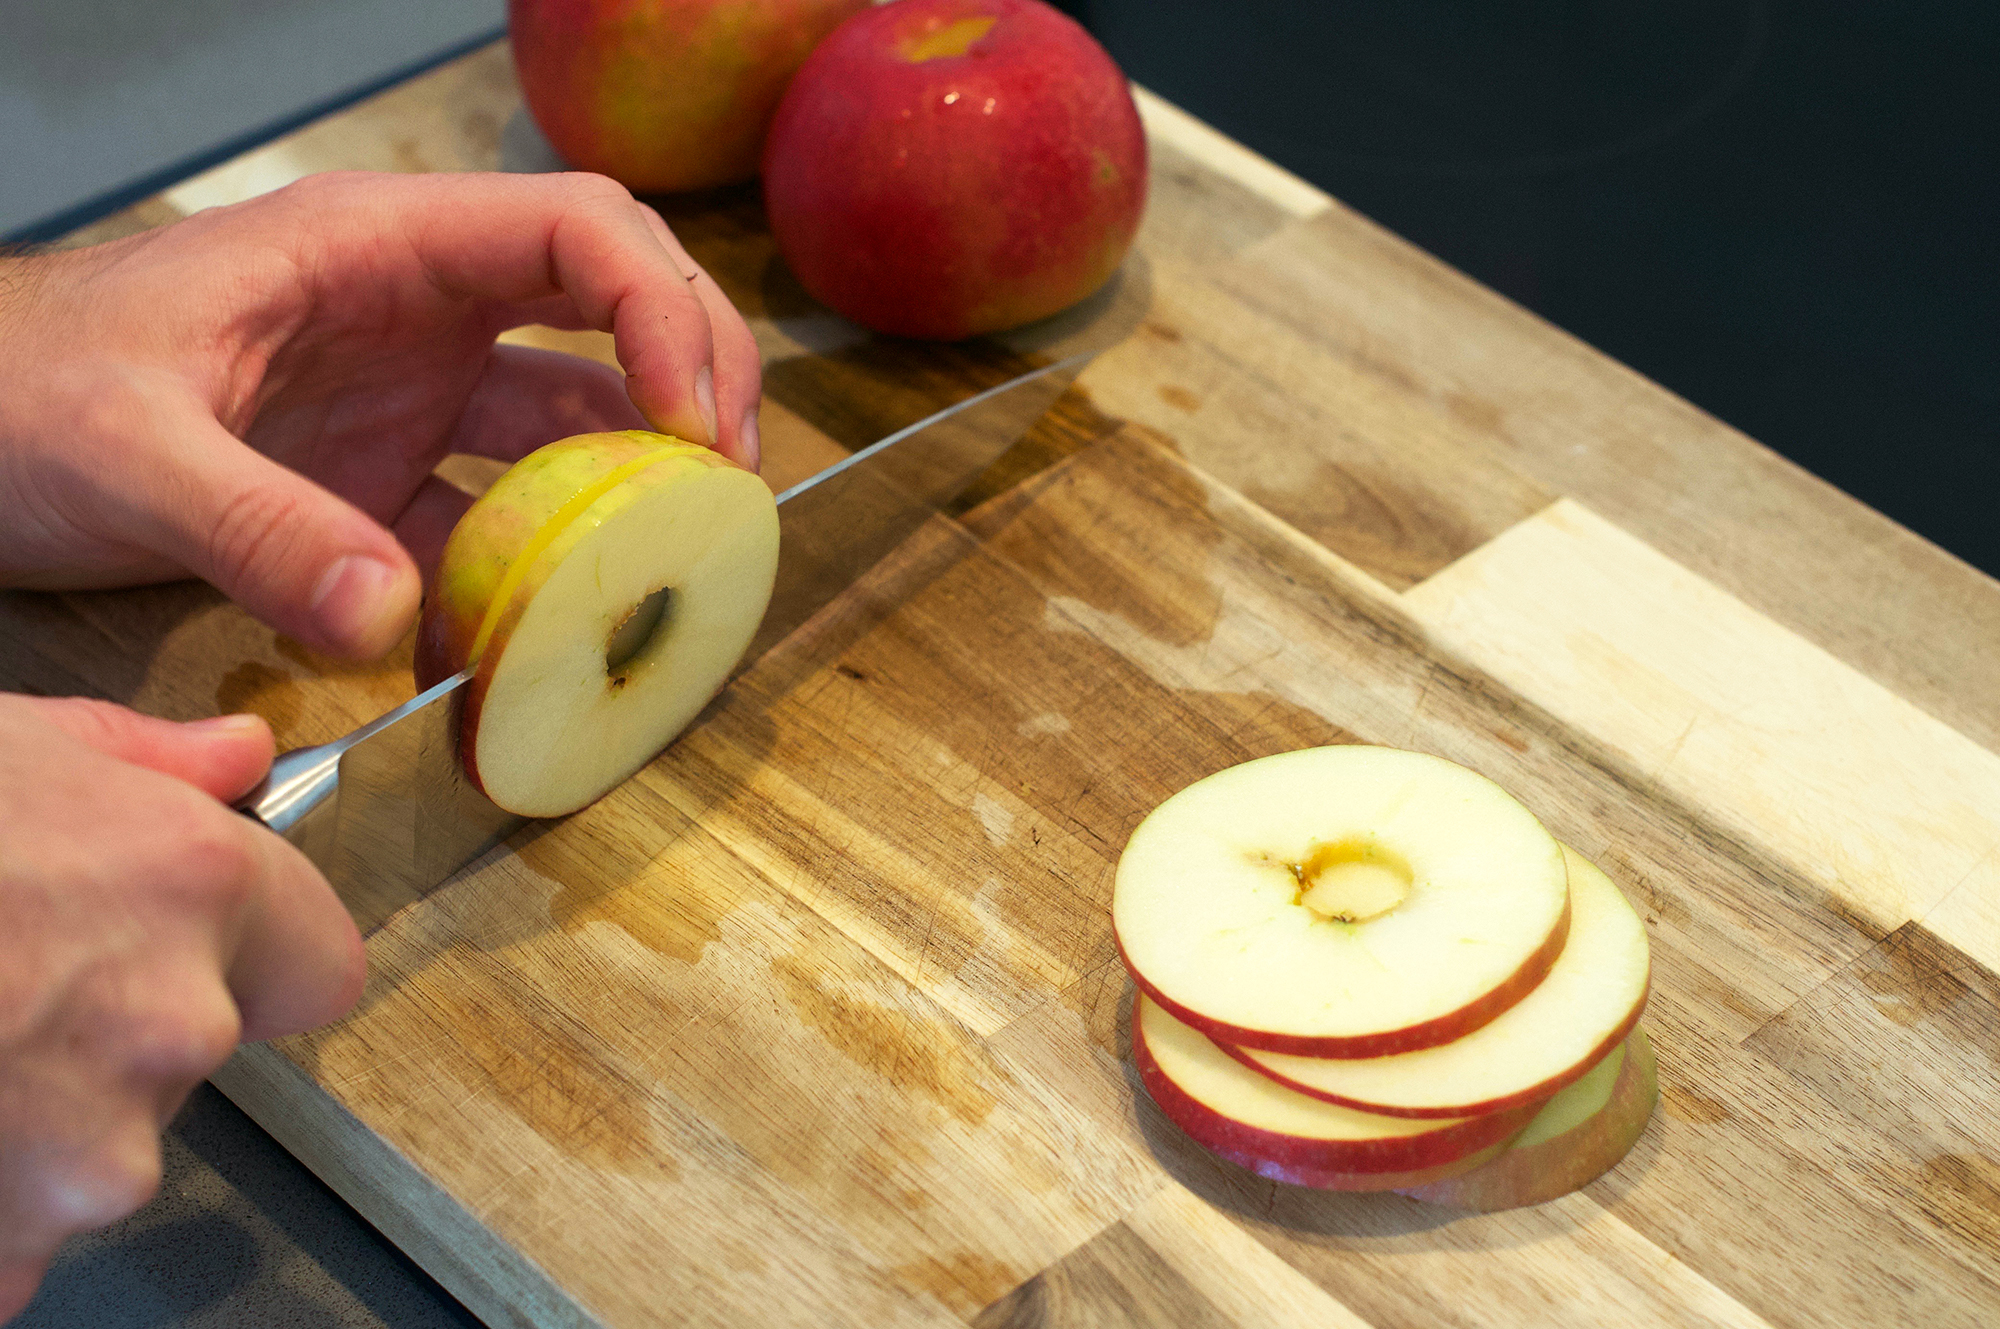 Slicing cored apples on wooden chopping board